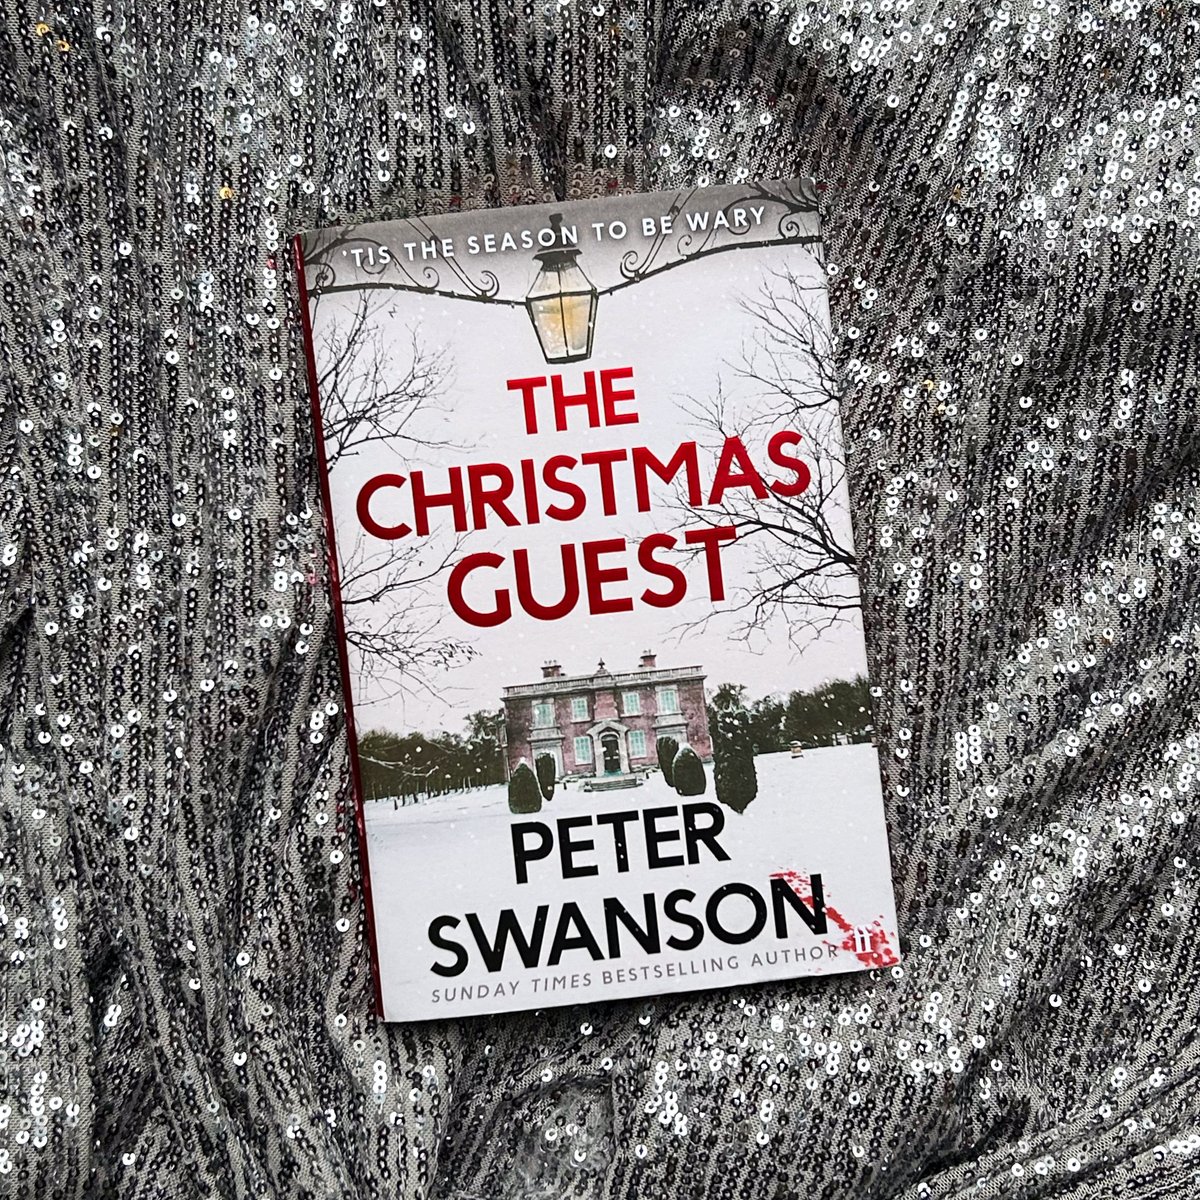 'Peter Swanson is a genius, and this is one of those stories that will remain embedded in your memory forever as it’s funny, clever, sinister, and extremely gripping.' @Independent_ie 'Tis the season to be wary in The Christmas Guest by @PeterSwanson3, out now in hardback ✨